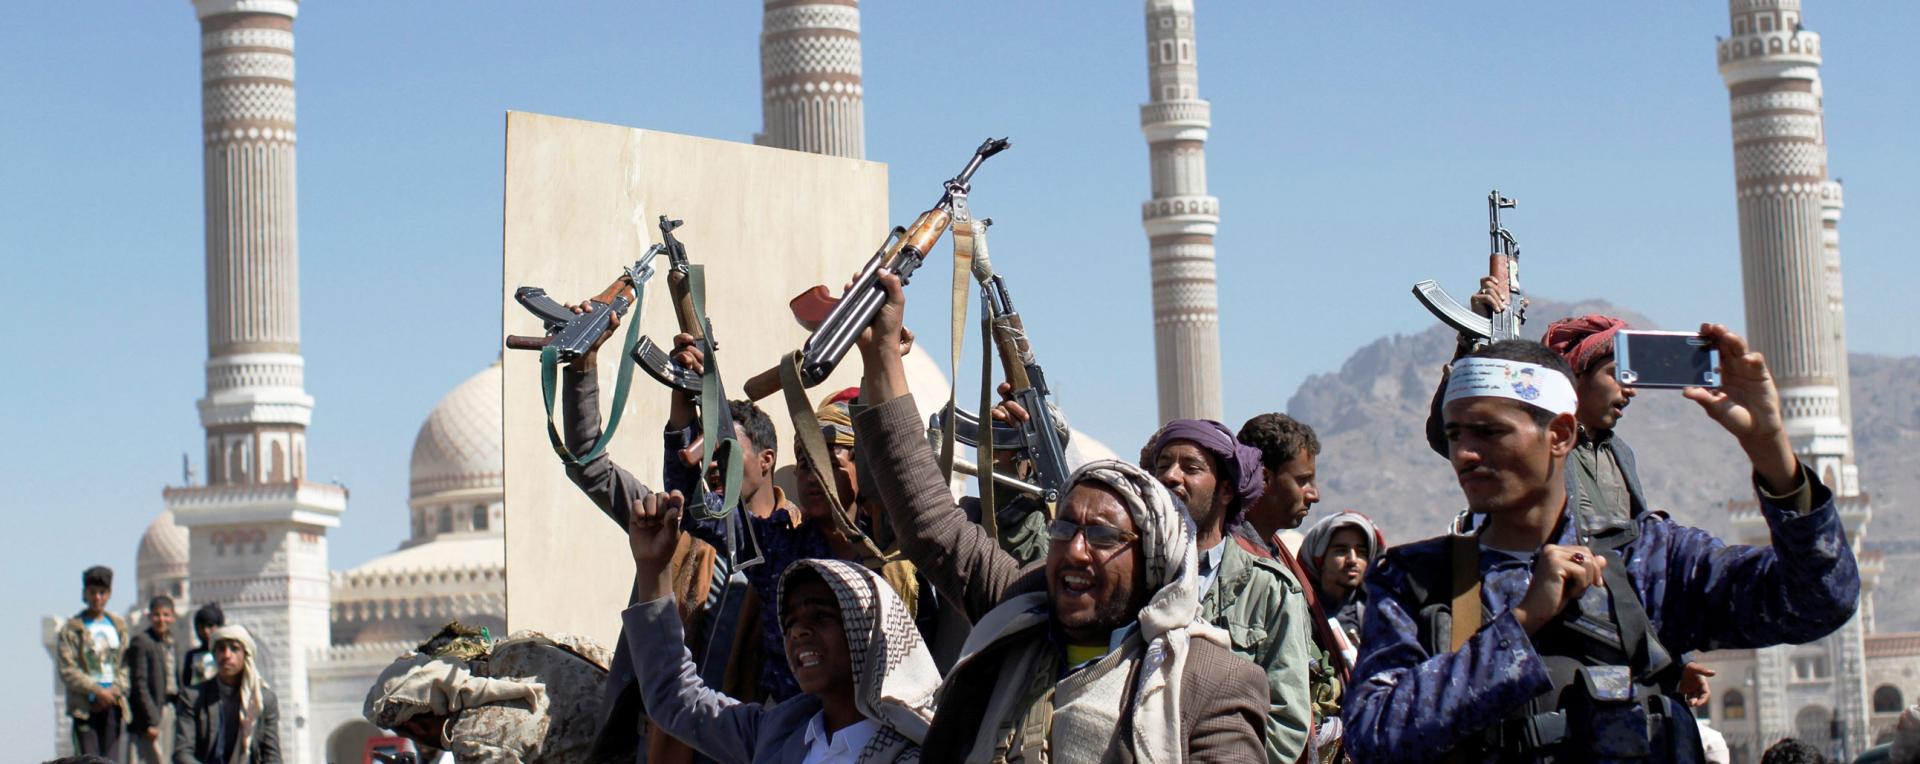 Saudi Arabia and its military allies joined the Yemeni government's war against the Huthis in March 2015